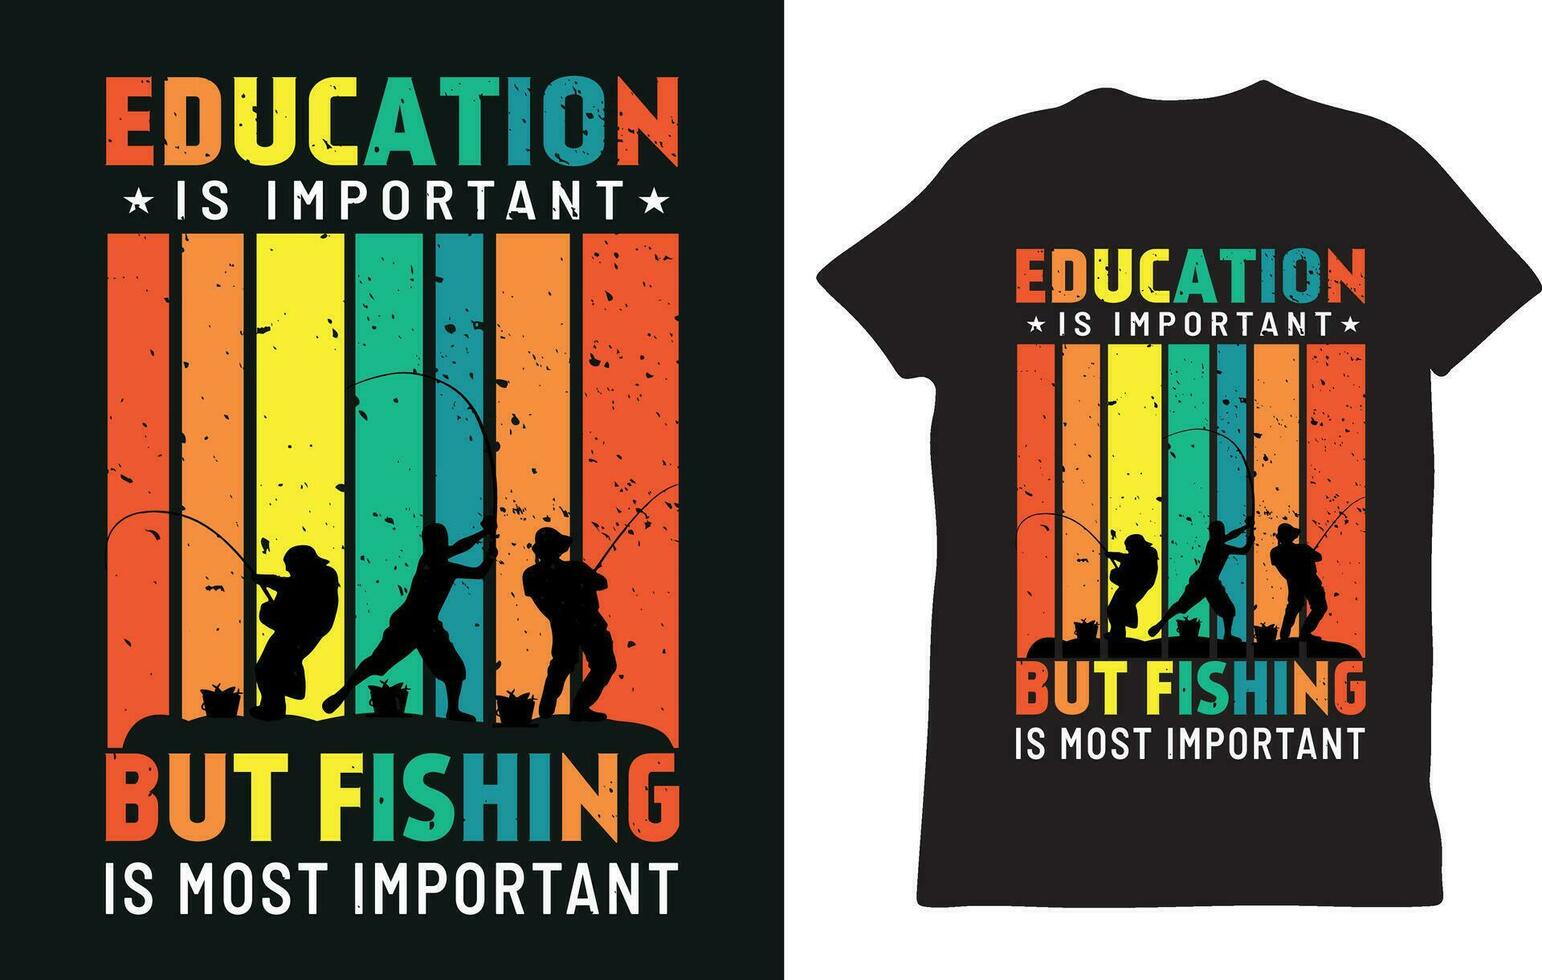 Education is important but fishing is most important T shirt design vector